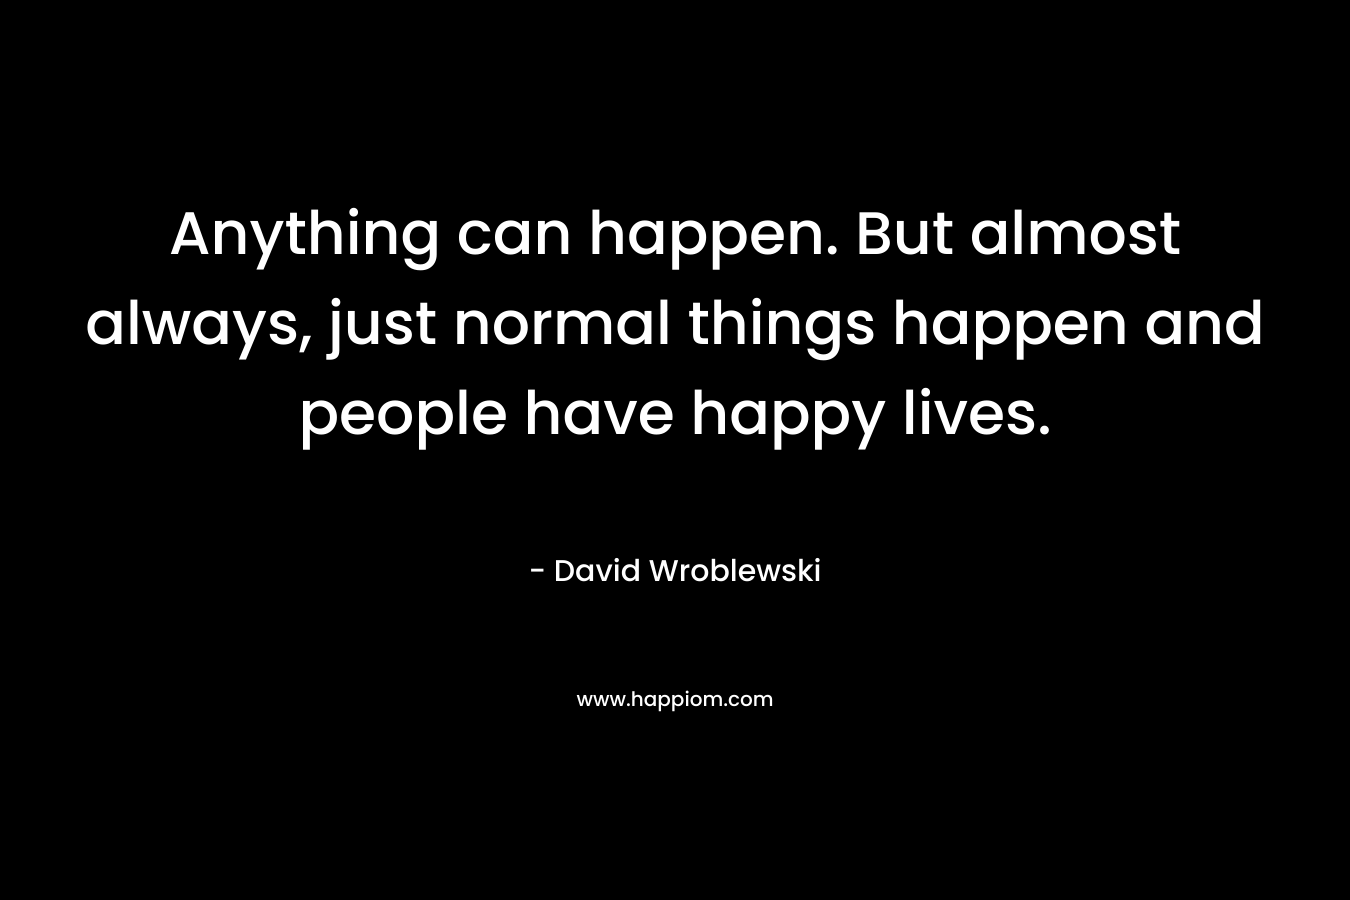 Anything can happen. But almost always, just normal things happen and people have happy lives. – David Wroblewski